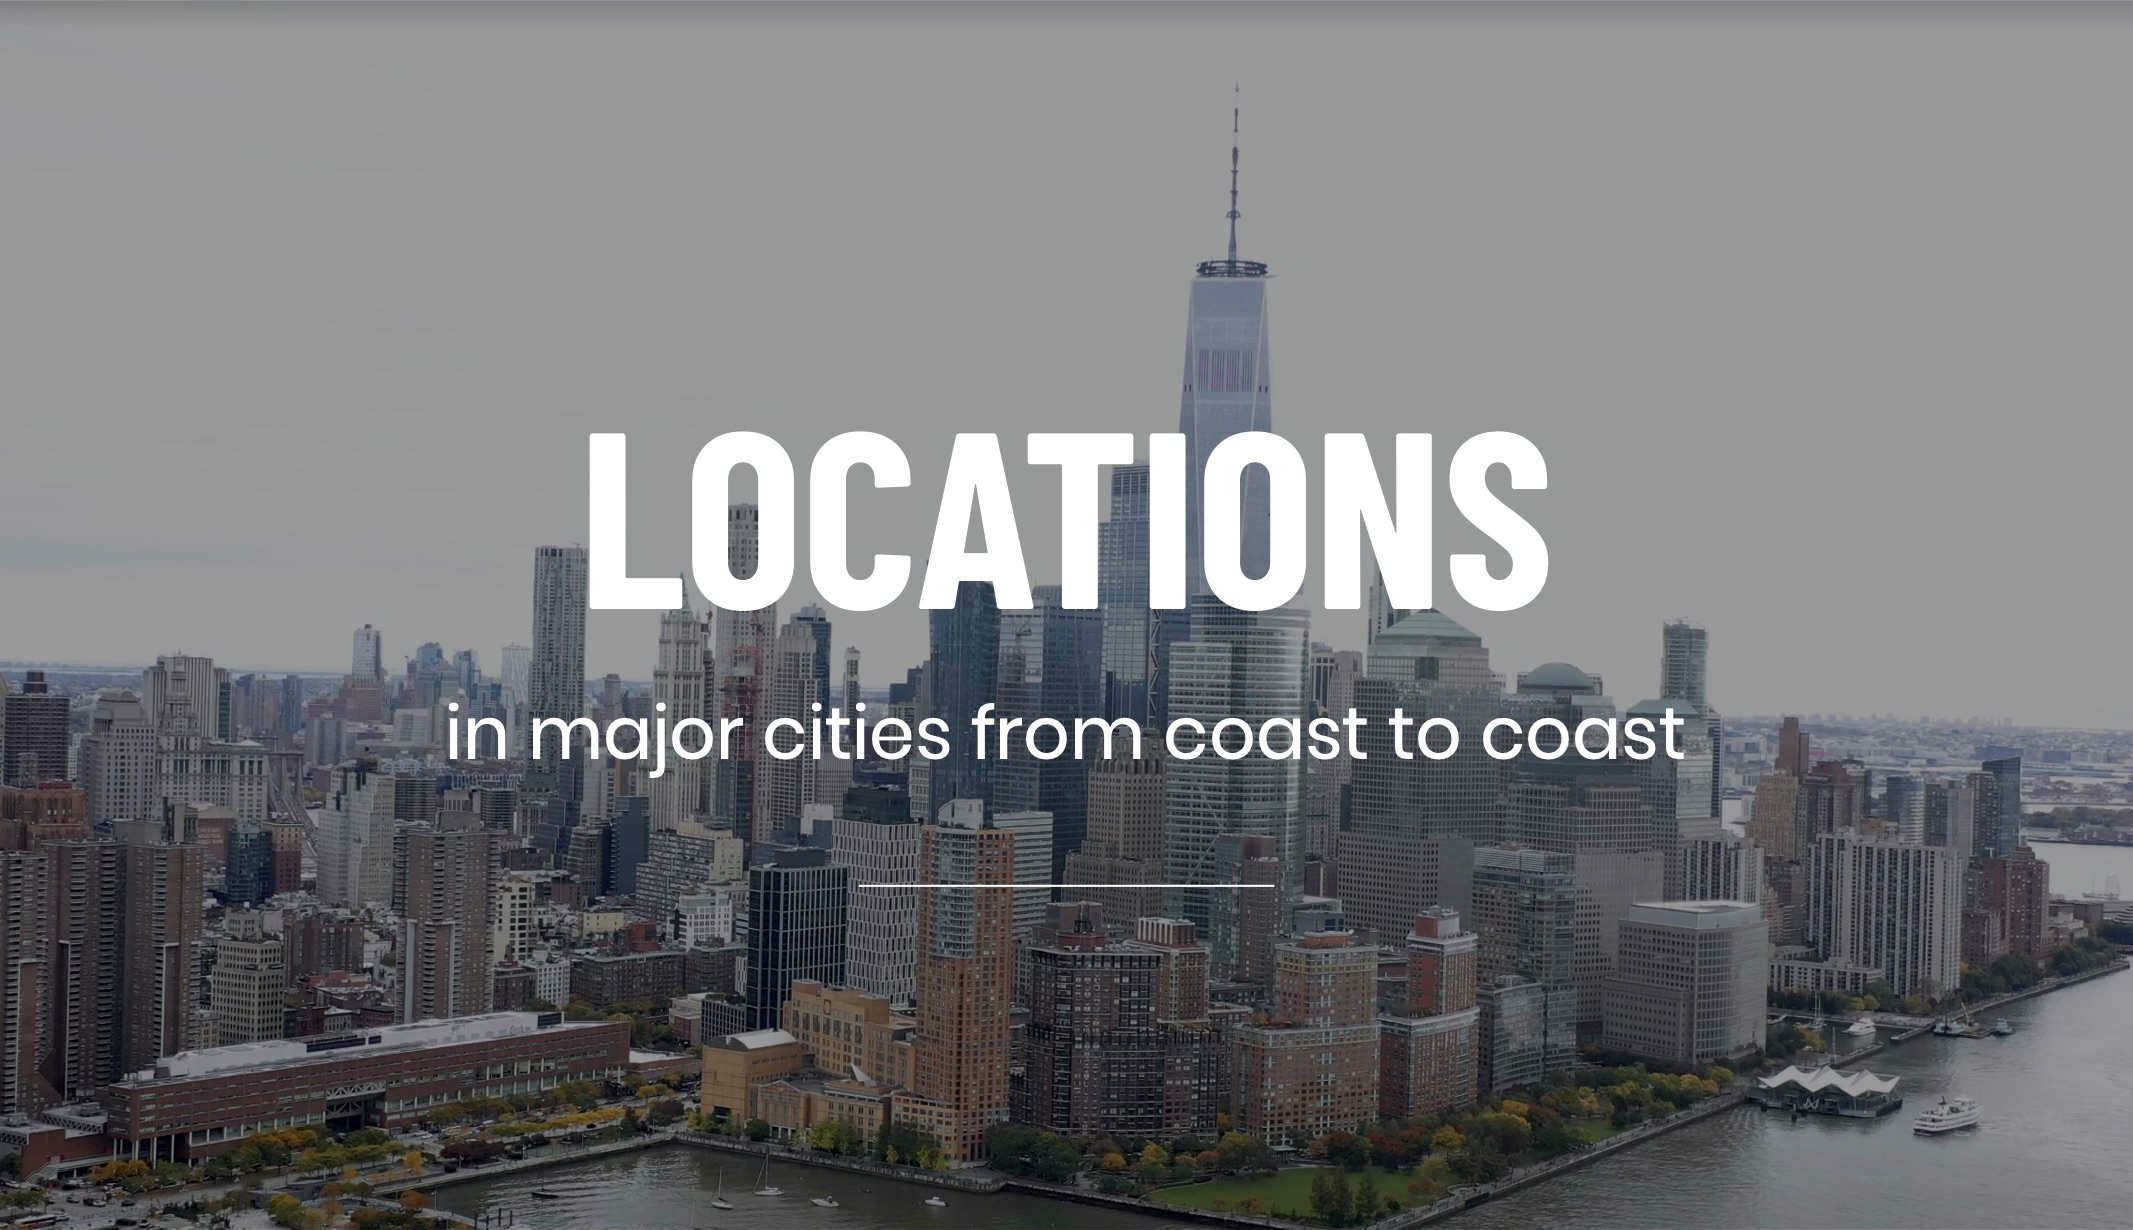 IU C&I Studios Page Production Resources White Locations in major cities from coast to coast title with backdrop of city